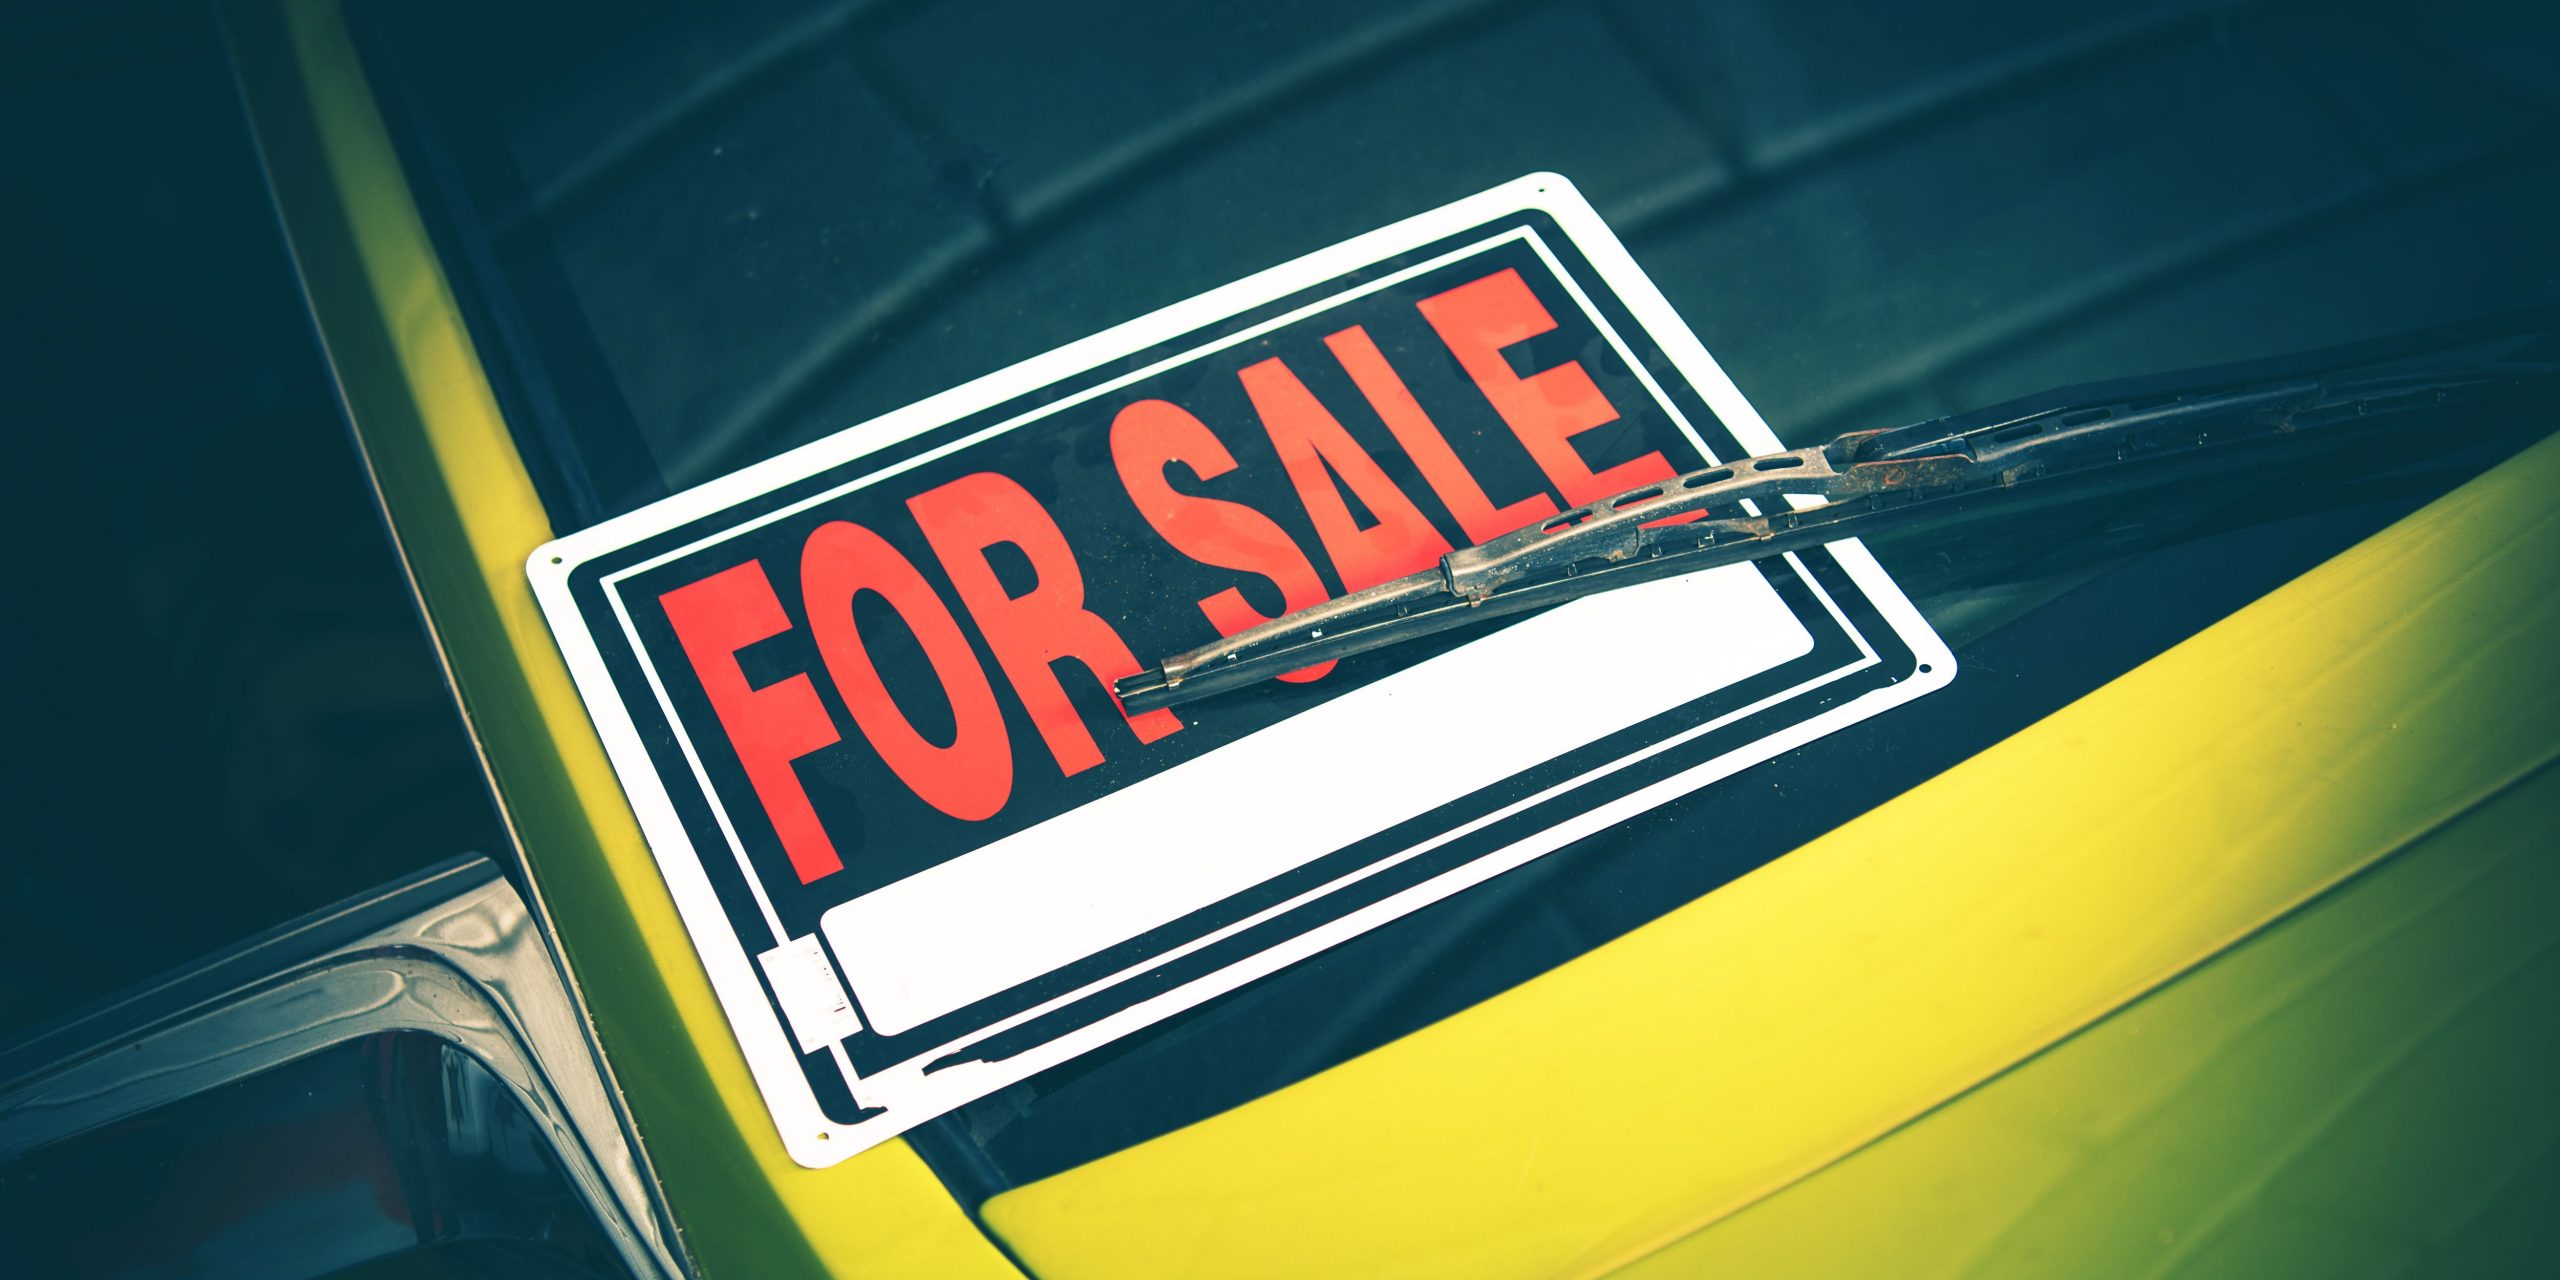 With Used-Car Demand Up, How to Get the Most When You Sell